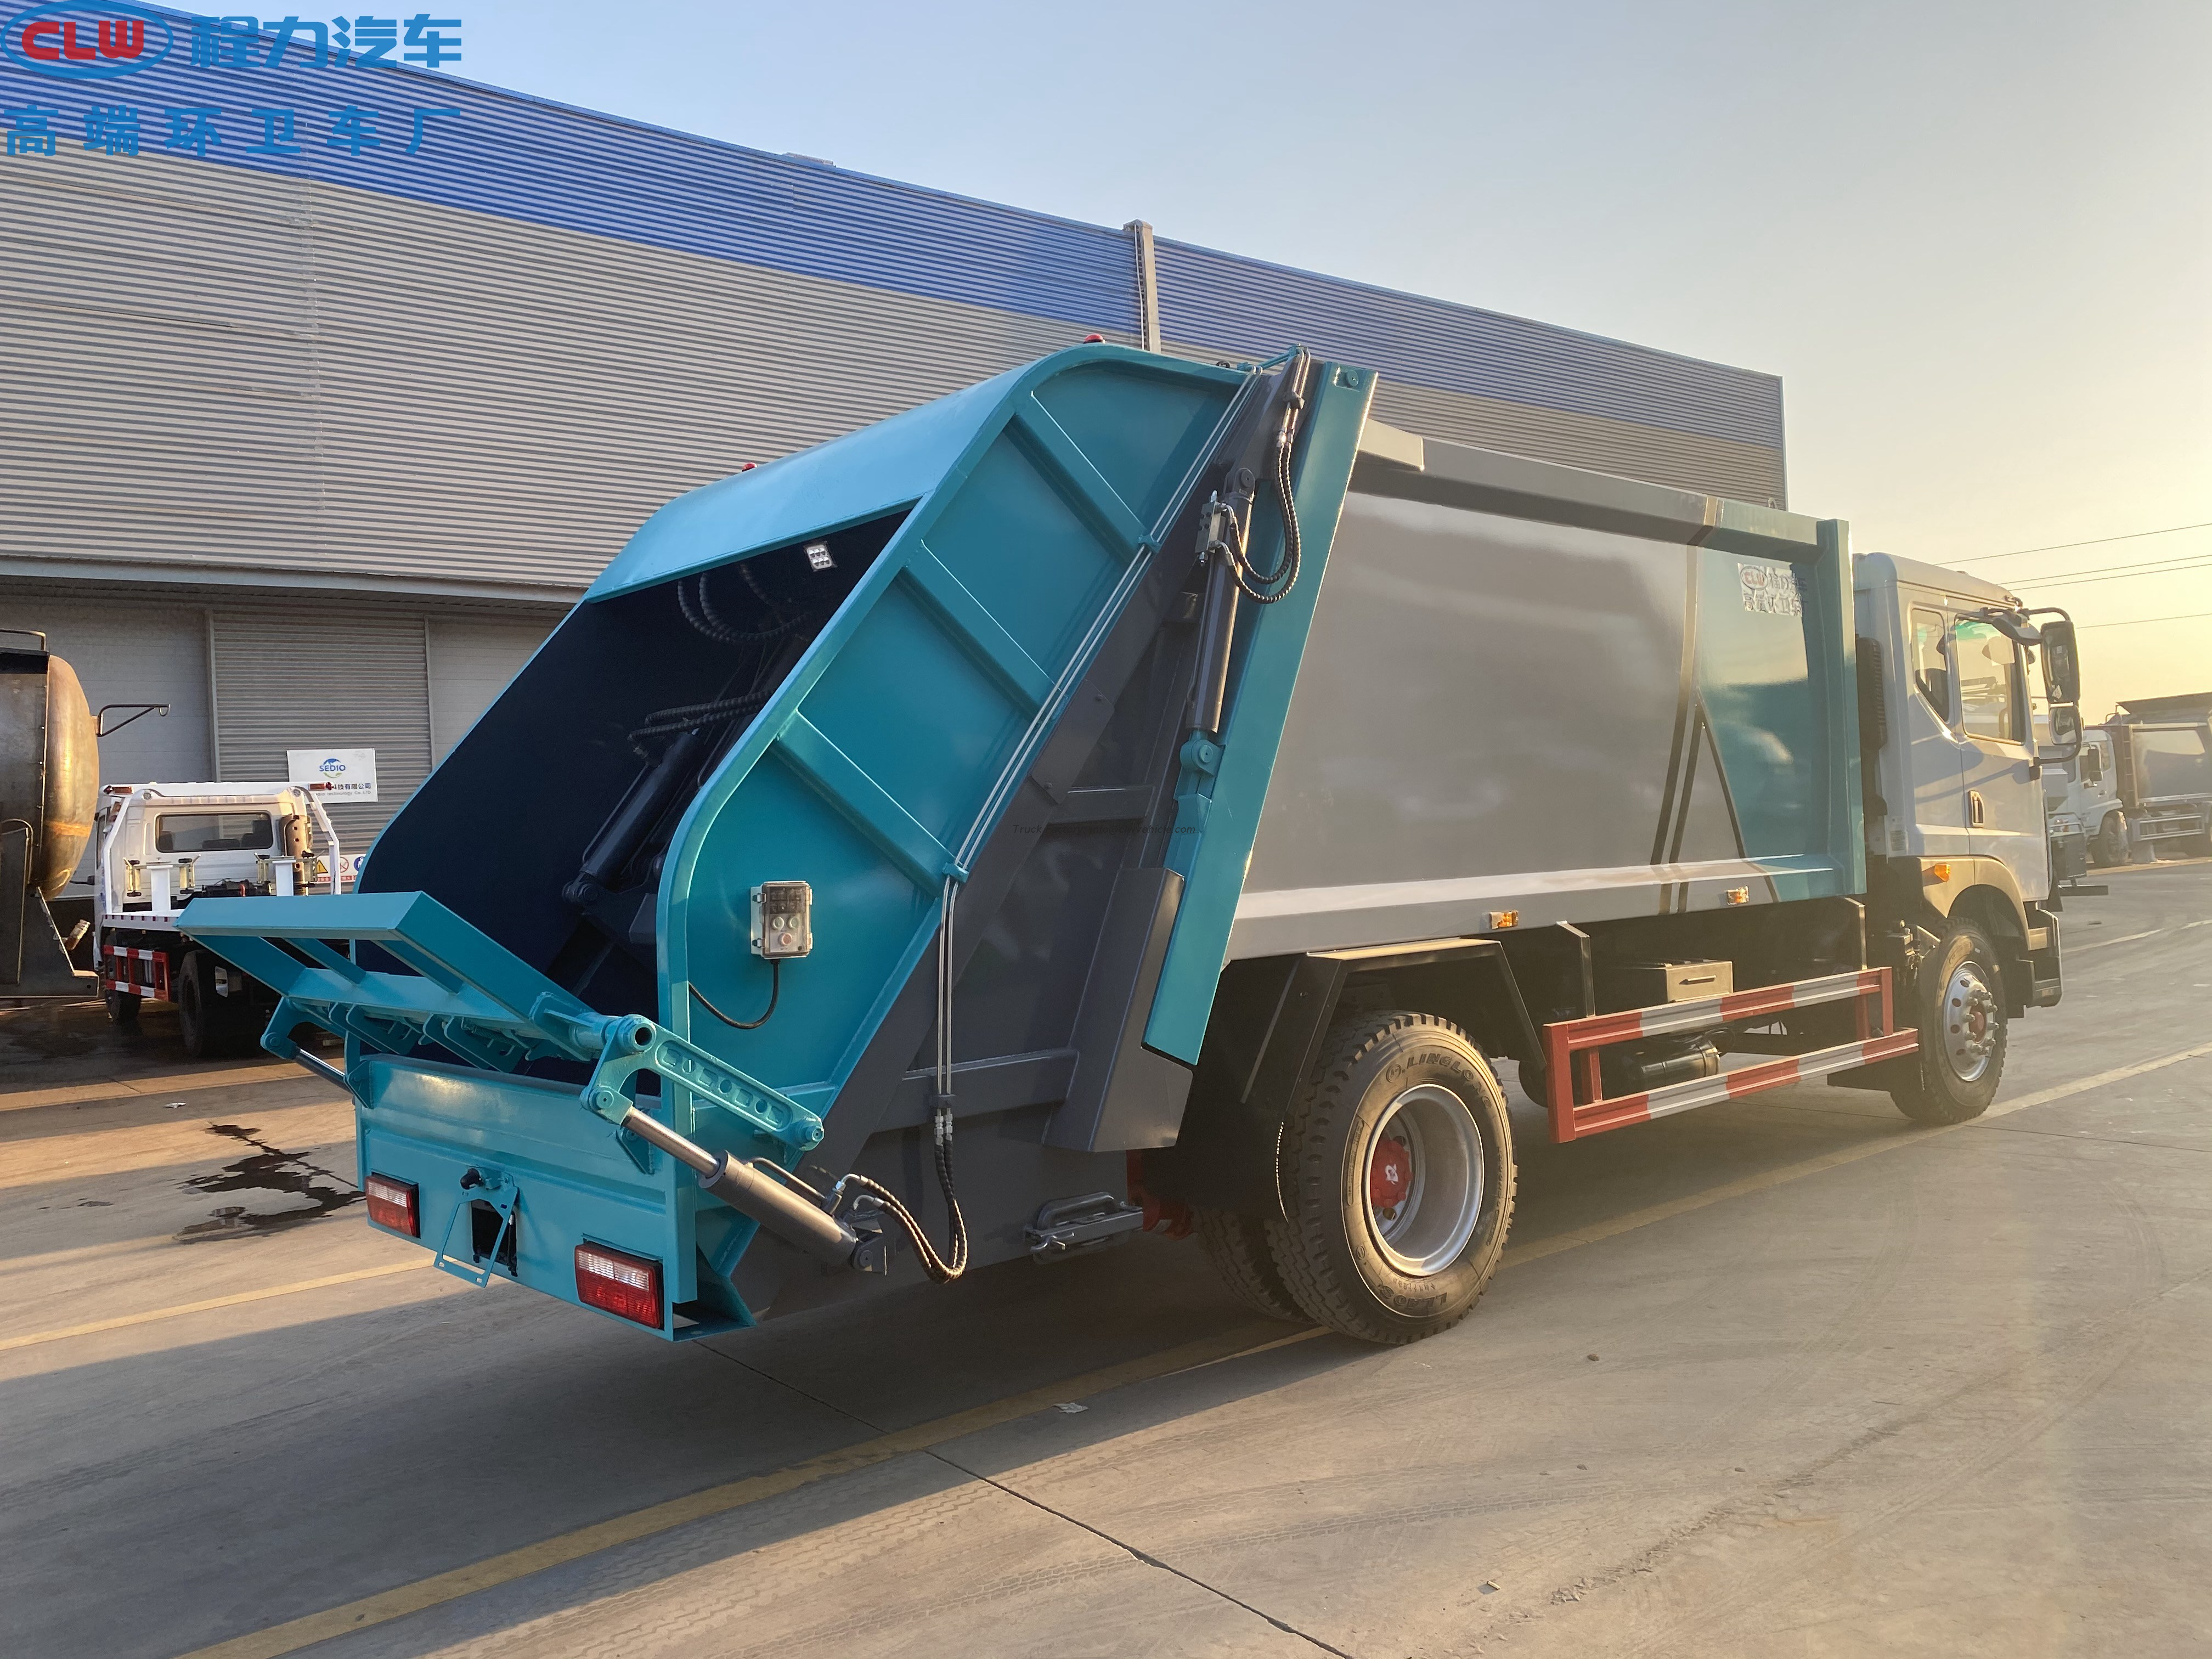 Diesel red Garbage Compactor Truck Garbage collection